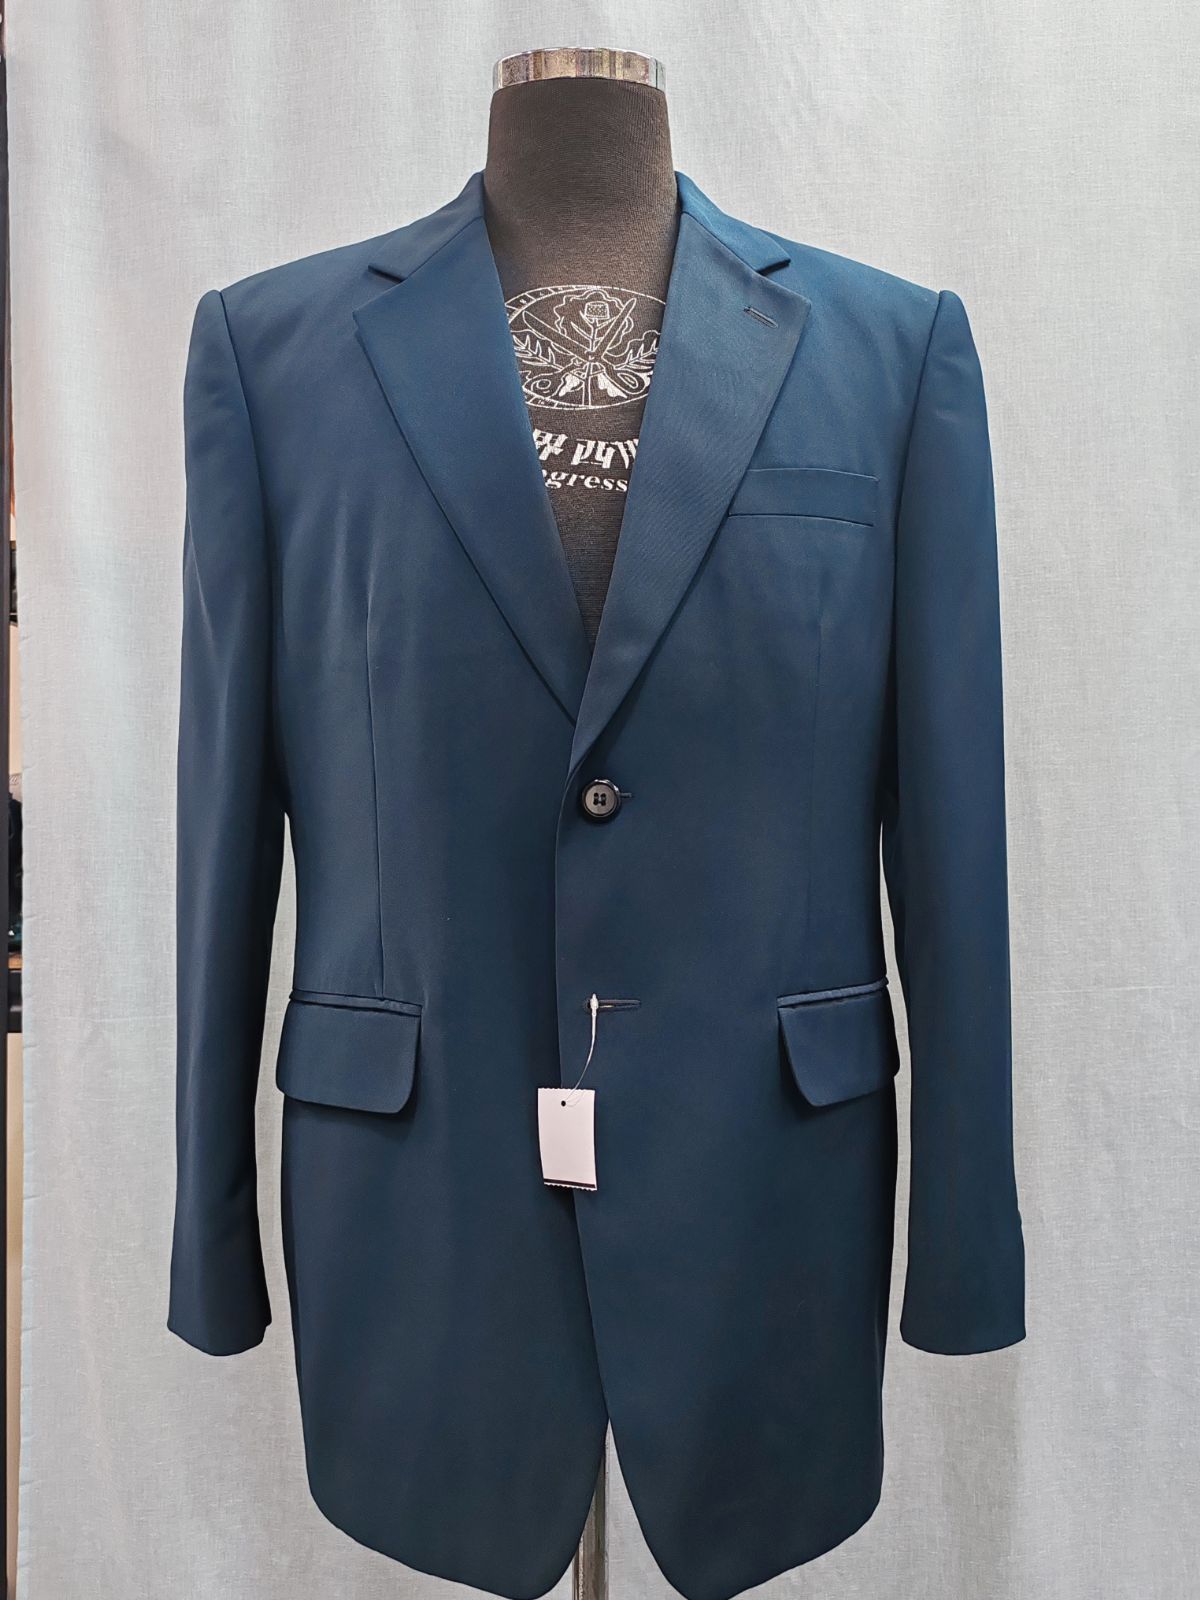 *6043* Readymade suit for sales